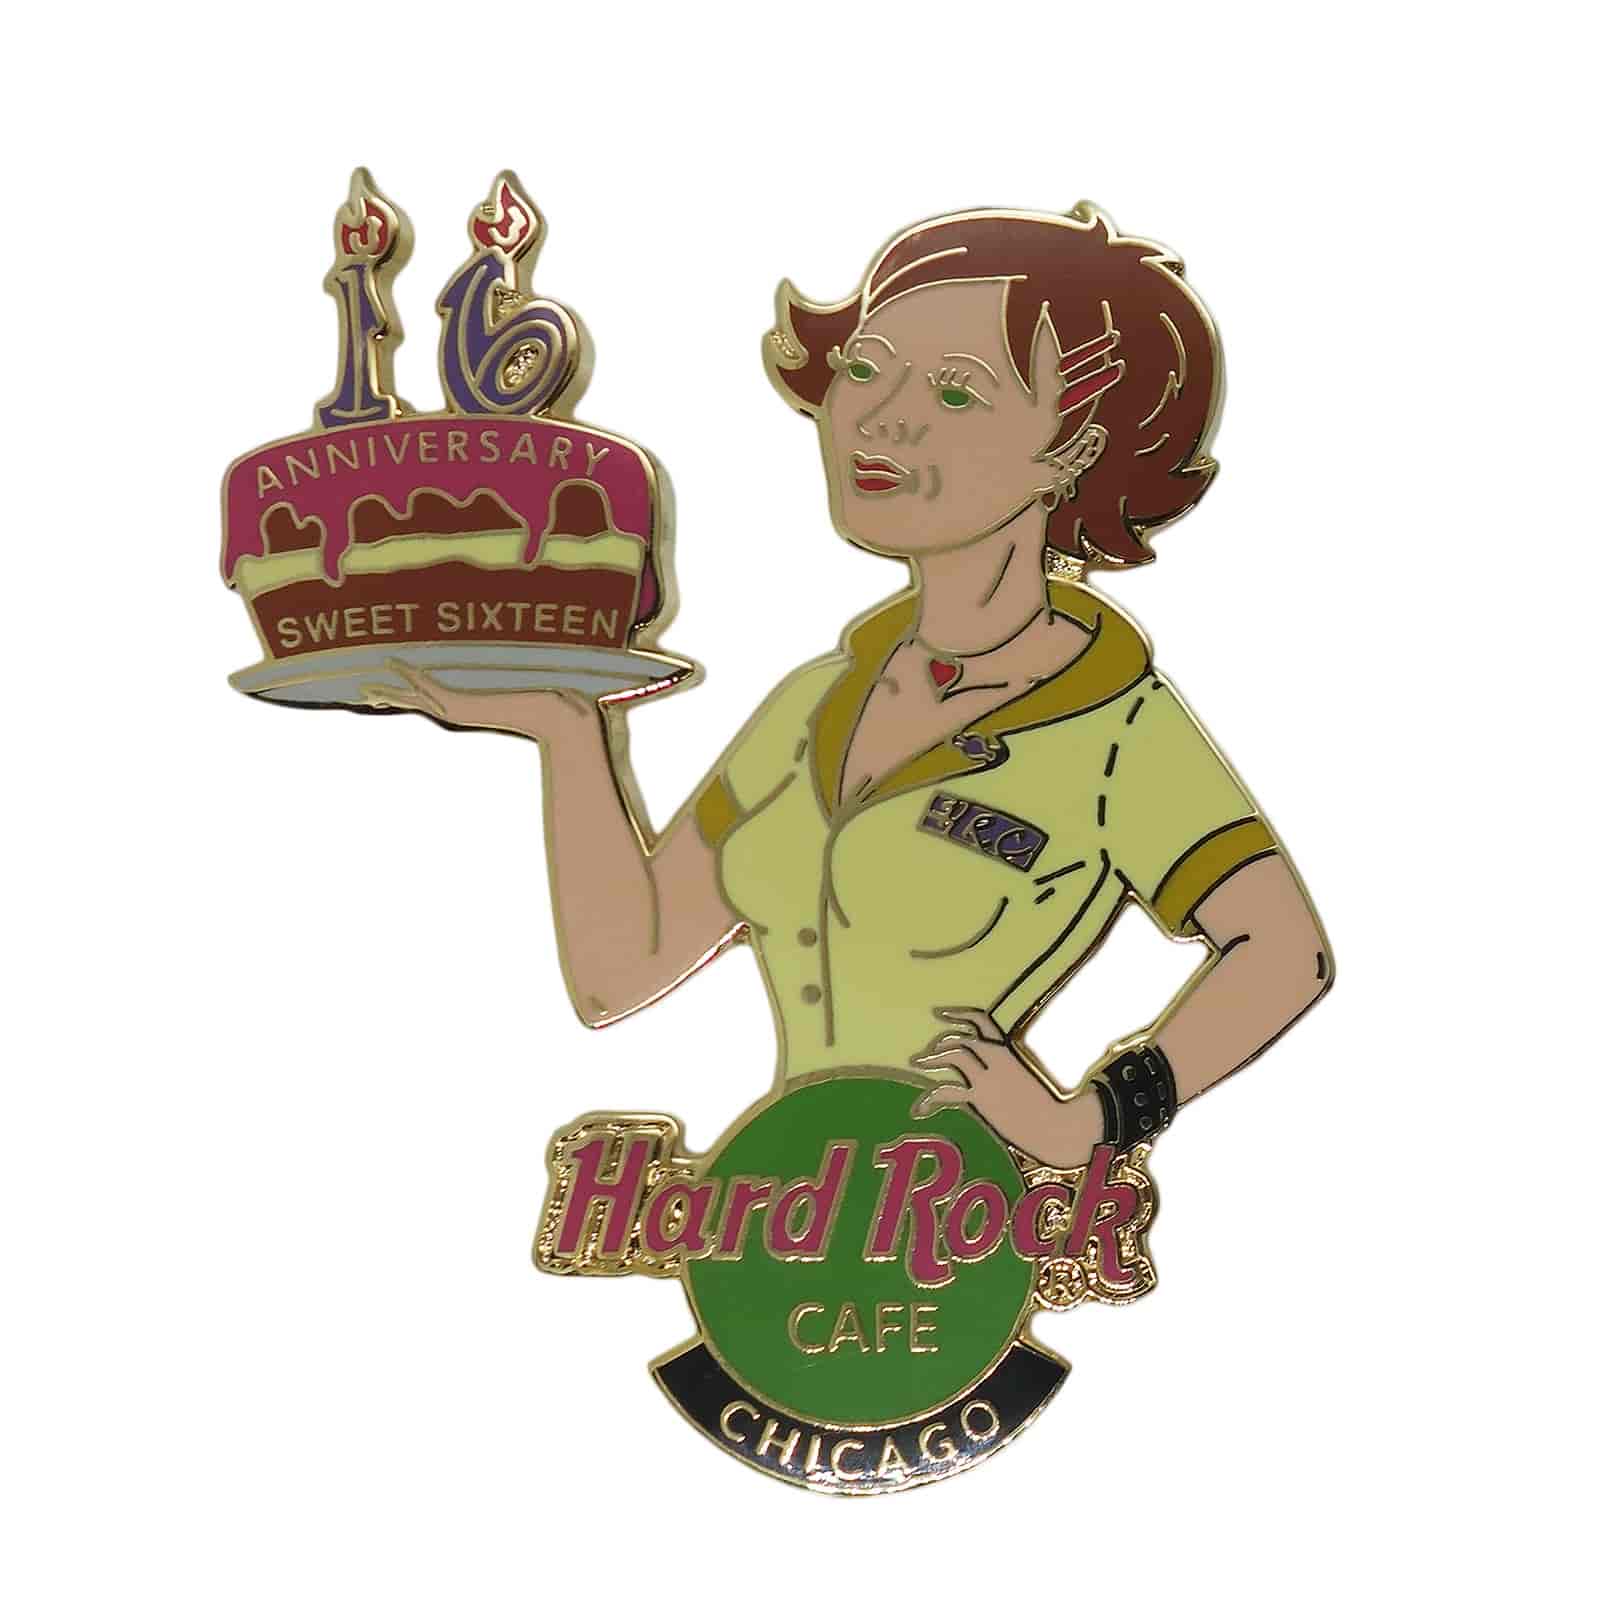 Hard Rock CAFE ウェイトレス女性 ピンズ ハードロックカフェ CHICAGO